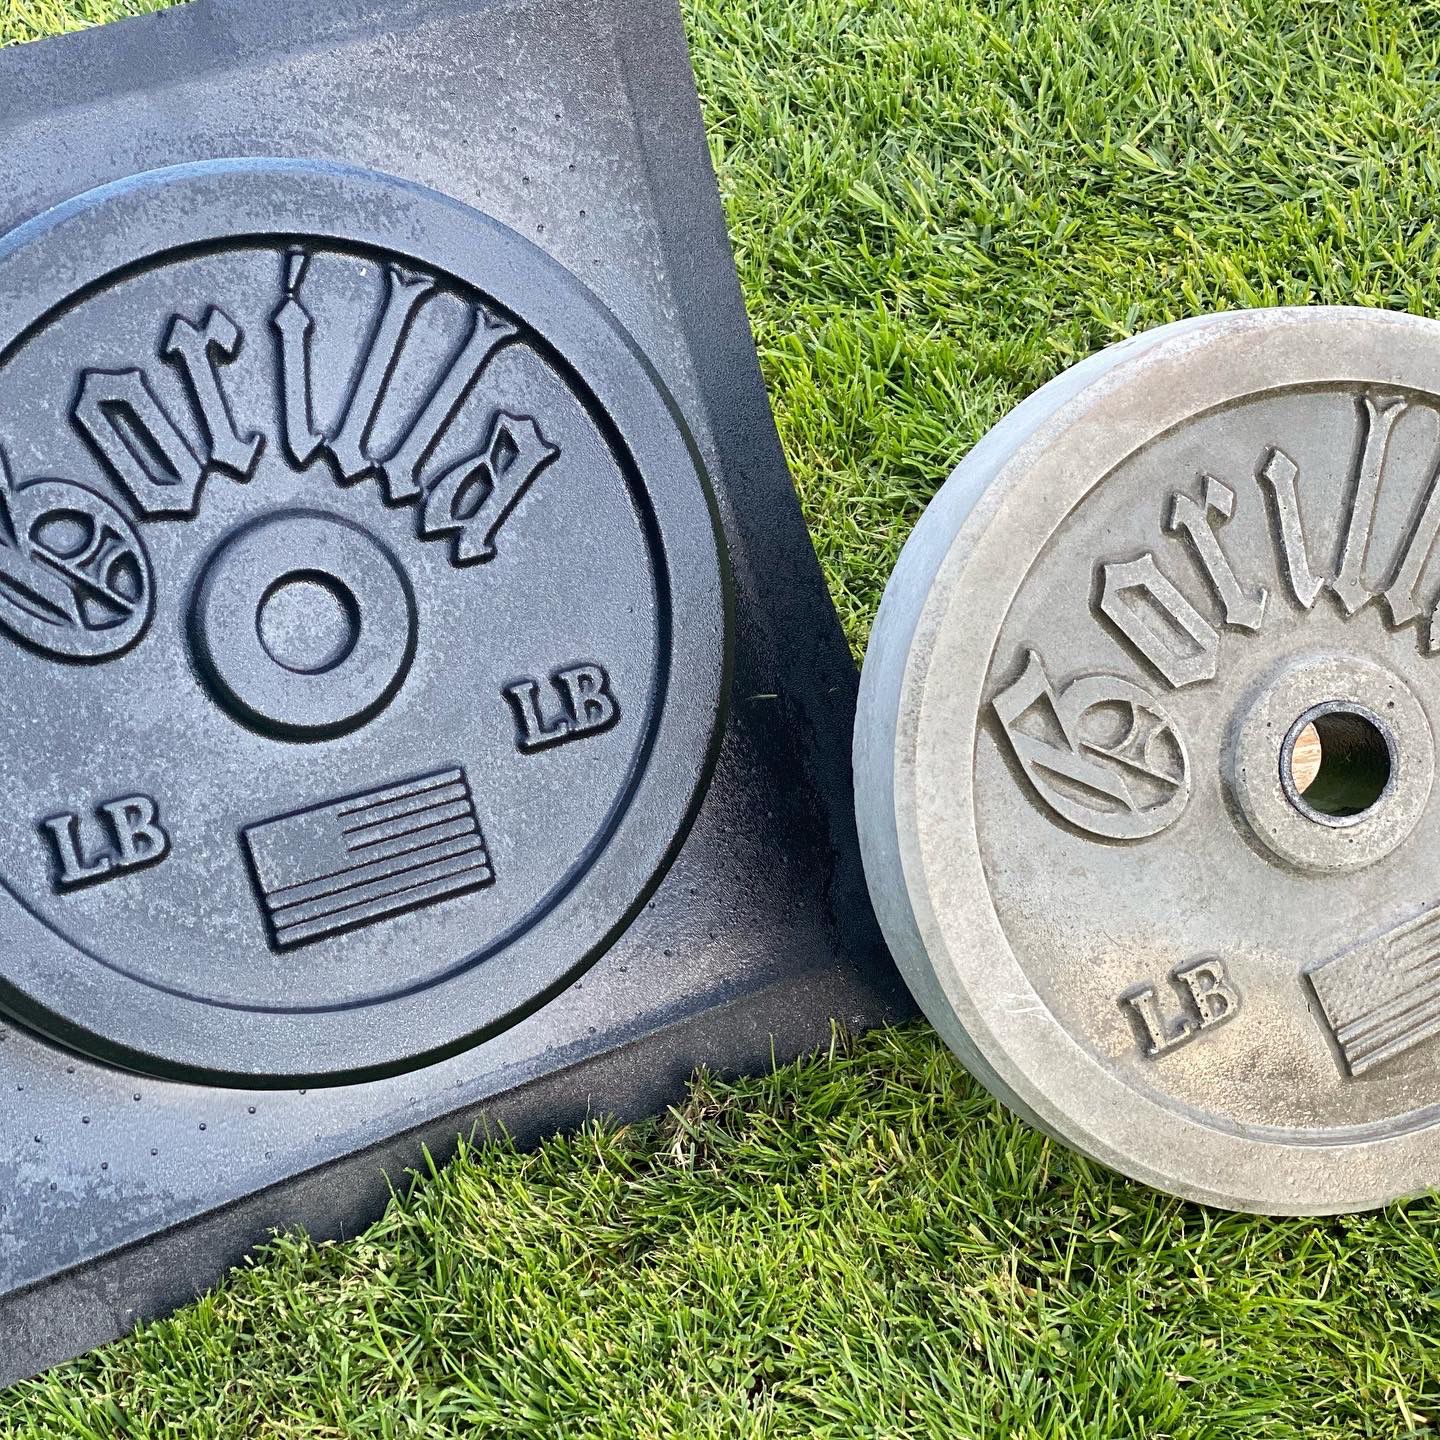 DIY Olympic Barbell Cement Weight Molds For Sale 